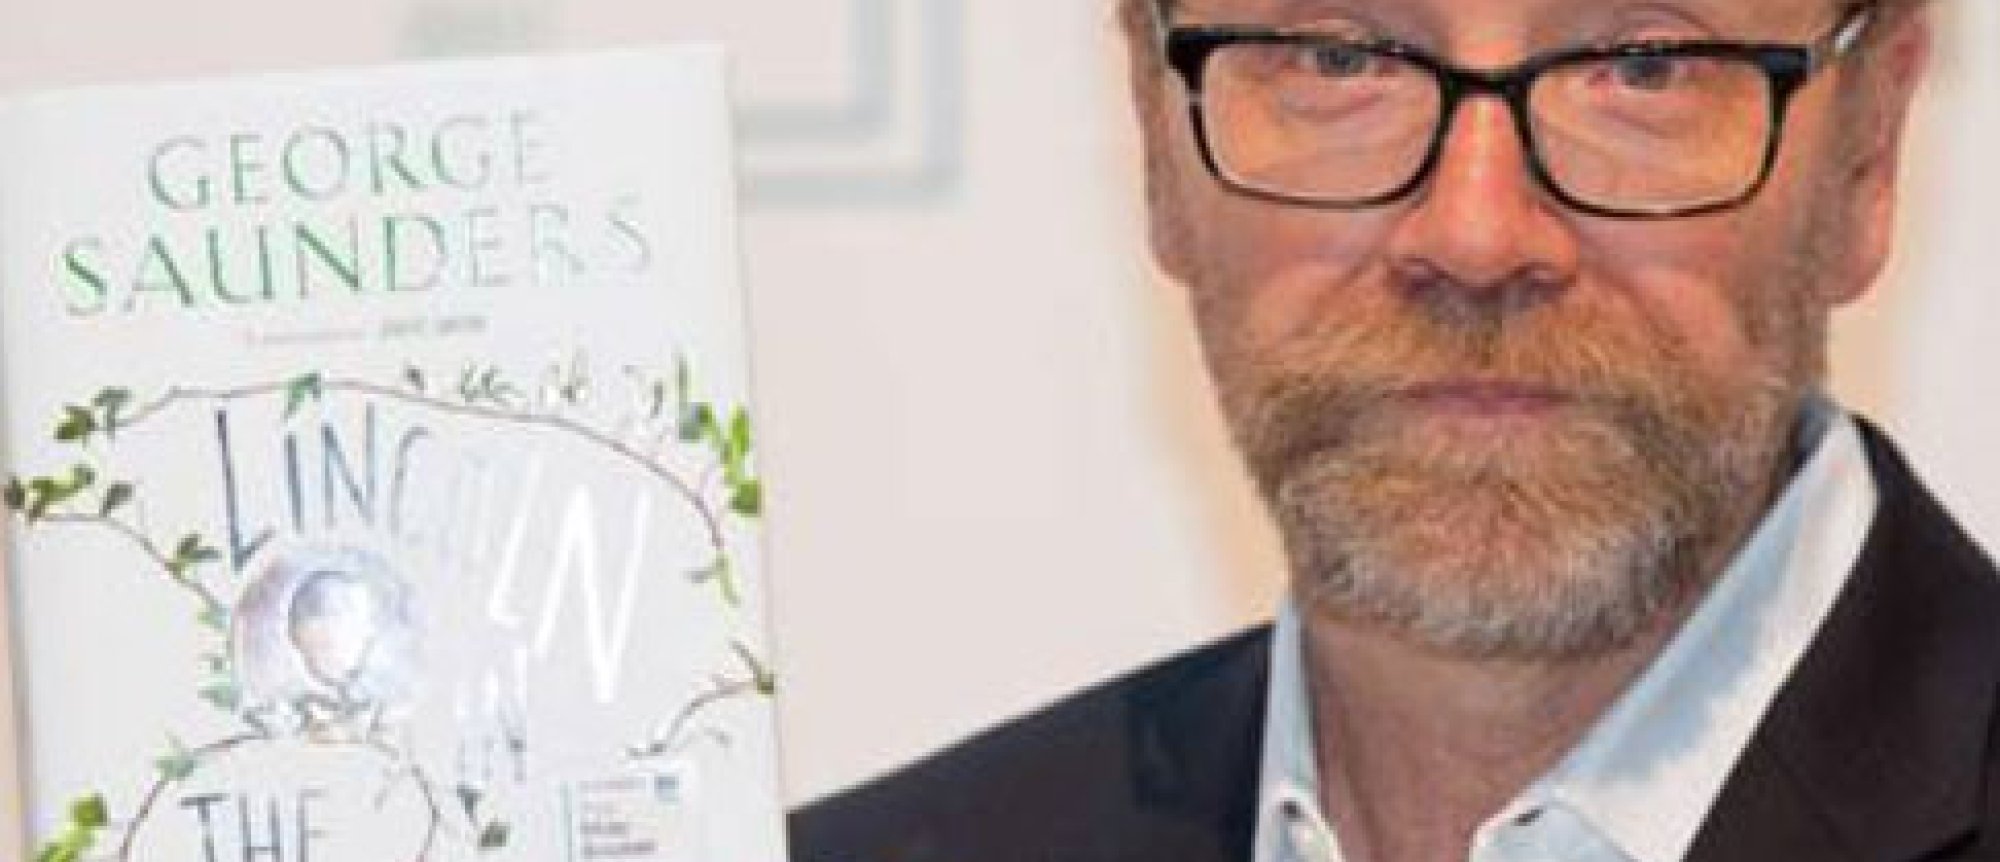 George Saunders wint Man Booker Prize